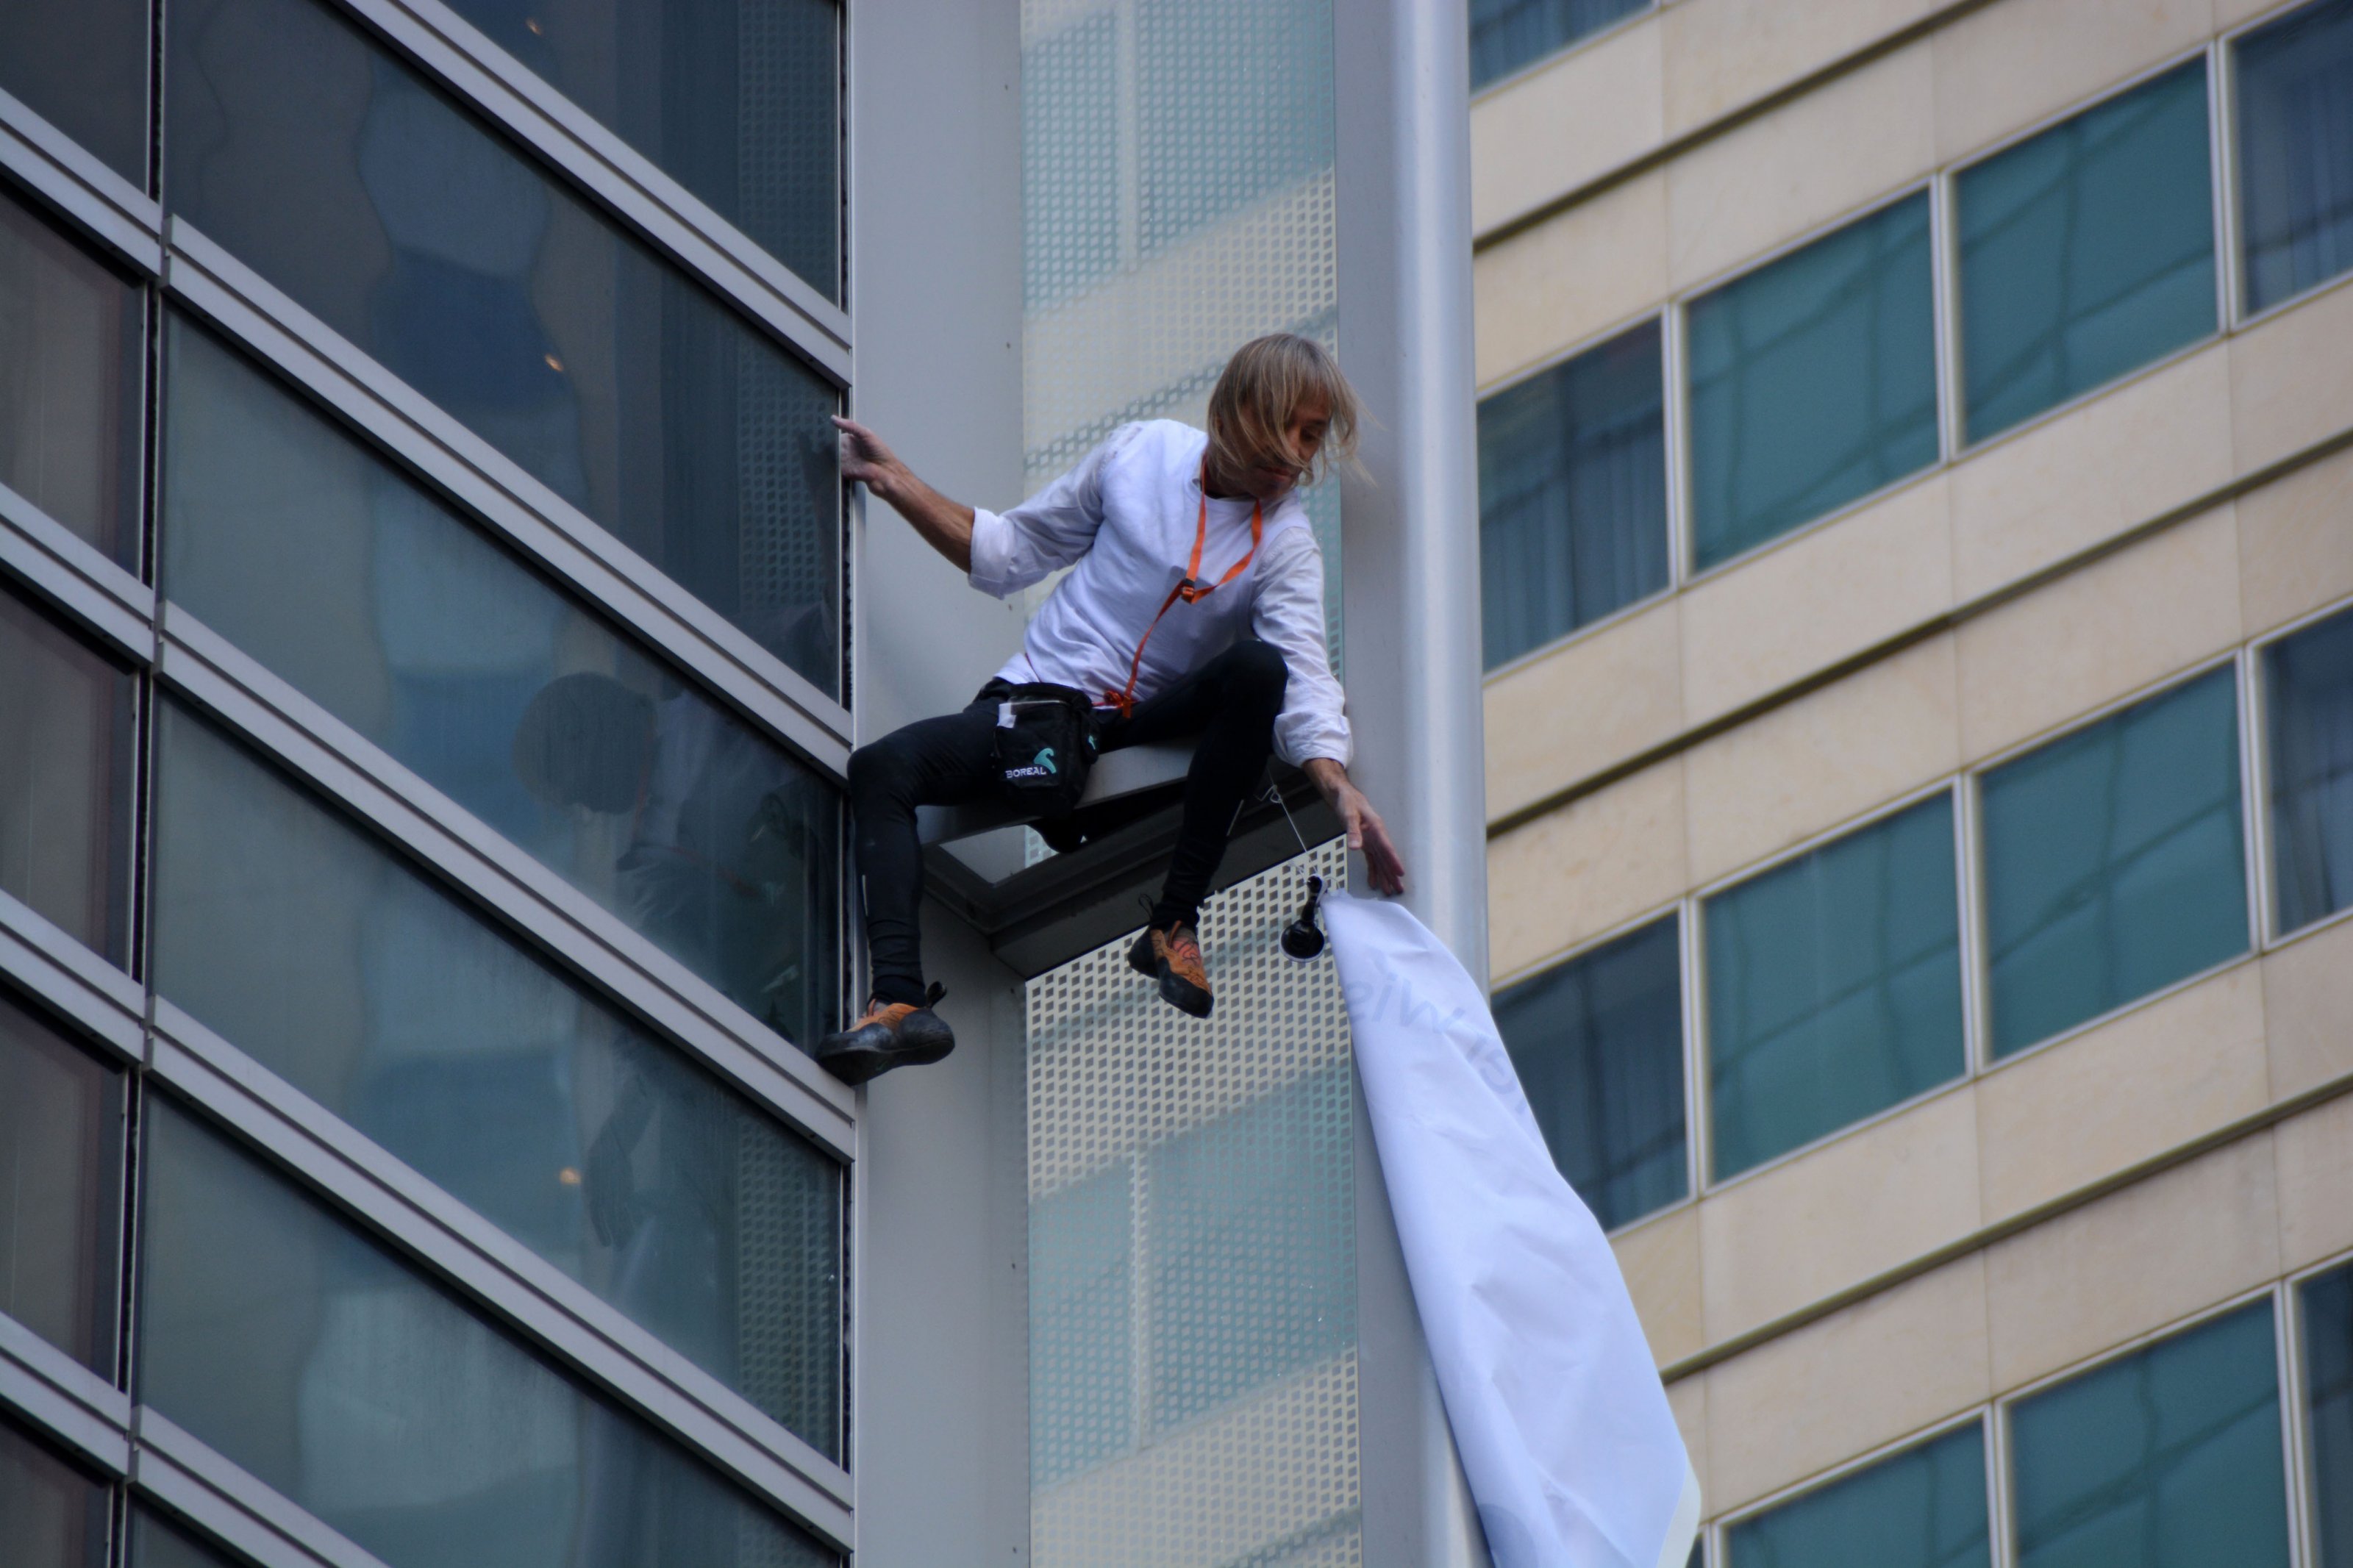 French urban climber Alain Robert nicknamed 'Spiderman' climbing French energy group Engie's building At La Defense business district in Nanterre suburb of Paris, France on September 23, 2015. Photo by Thierry Plessis/ABACAPRESS.COM